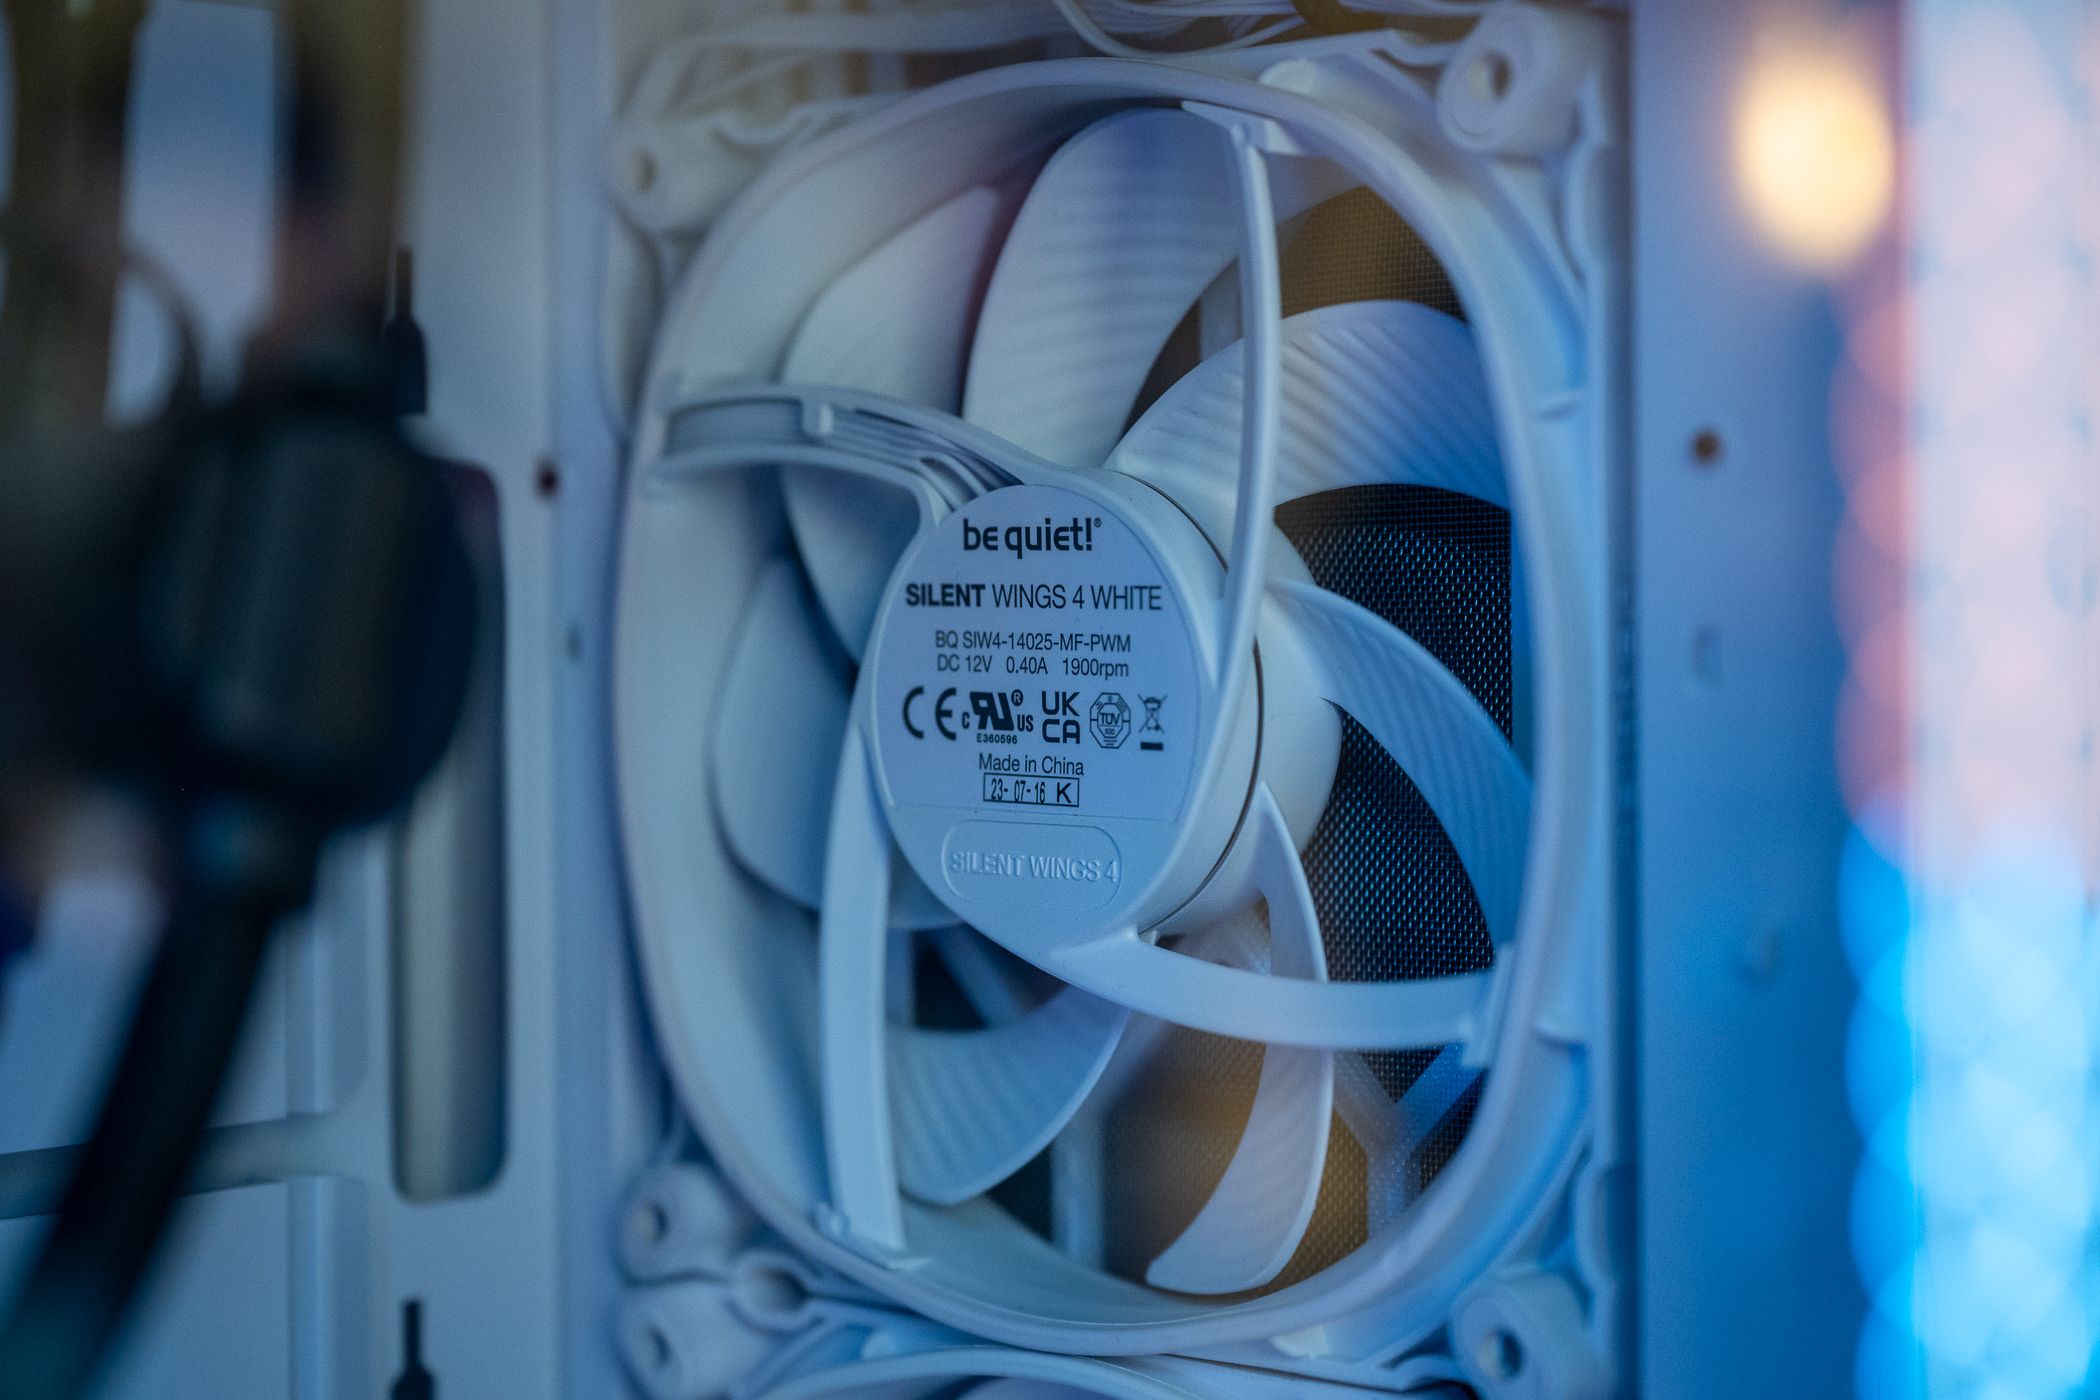 Be Quiet Silent Wings 4 White PC fan inside a gaming computer.